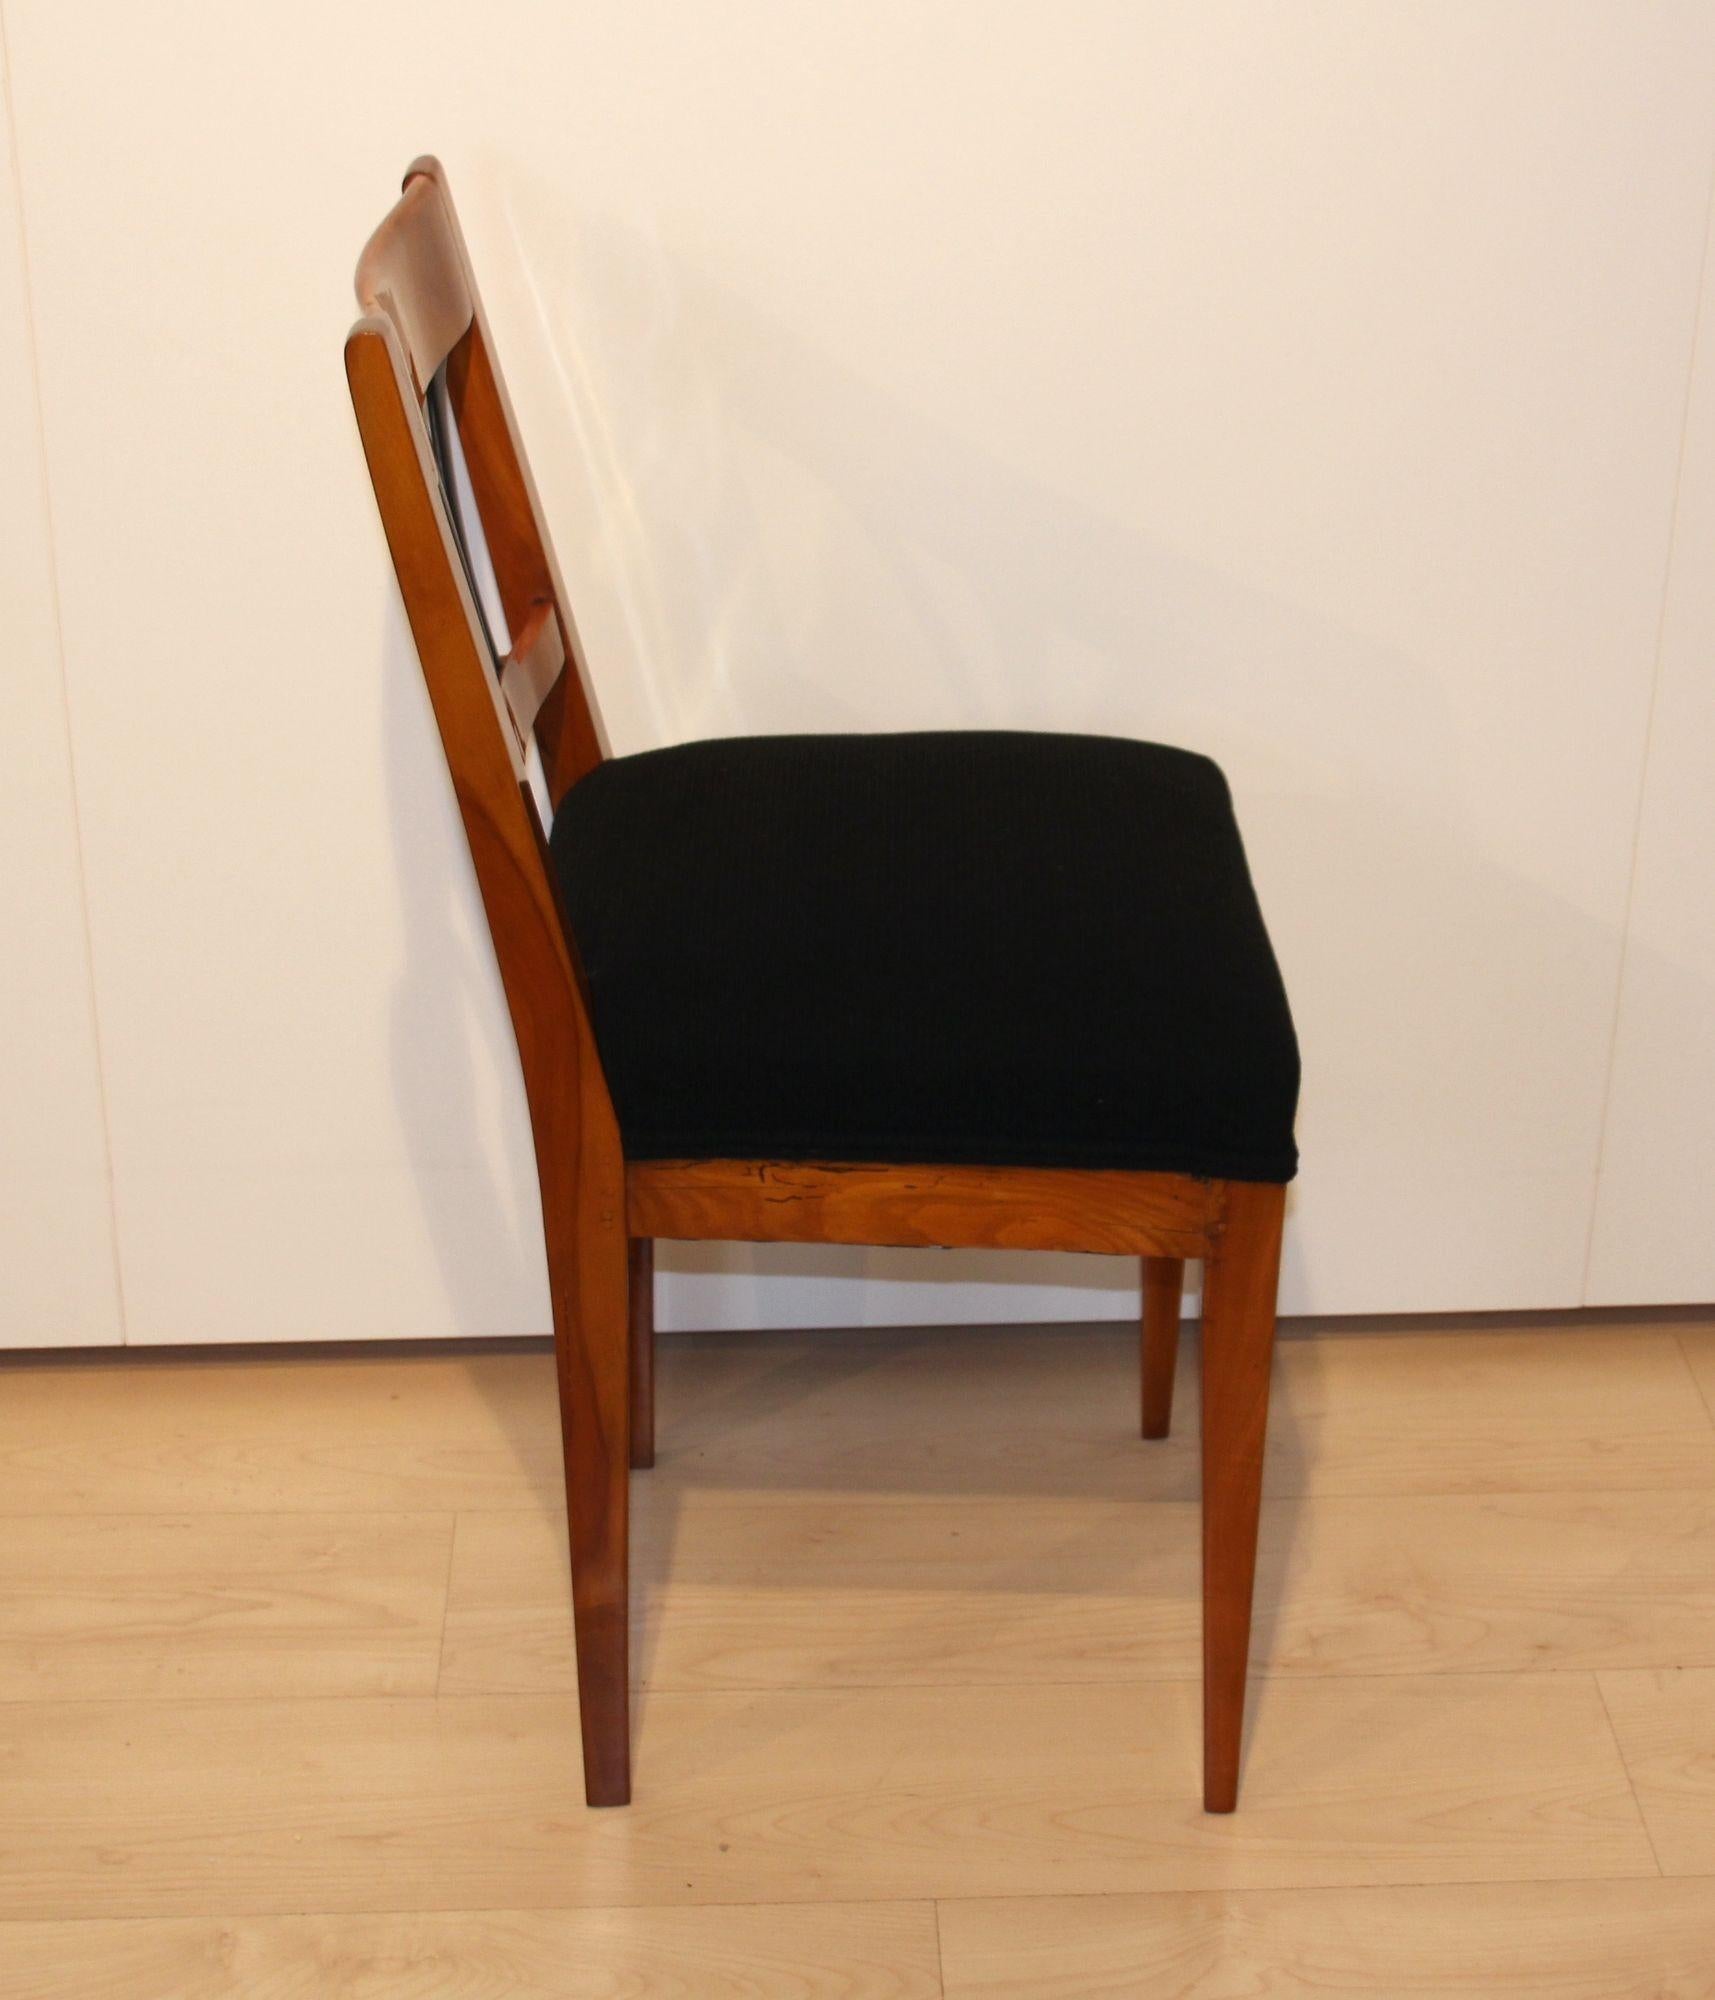 Early 19th Century Biedermeier Side Chair, Cherry Wood, South Germany circa 1830 For Sale